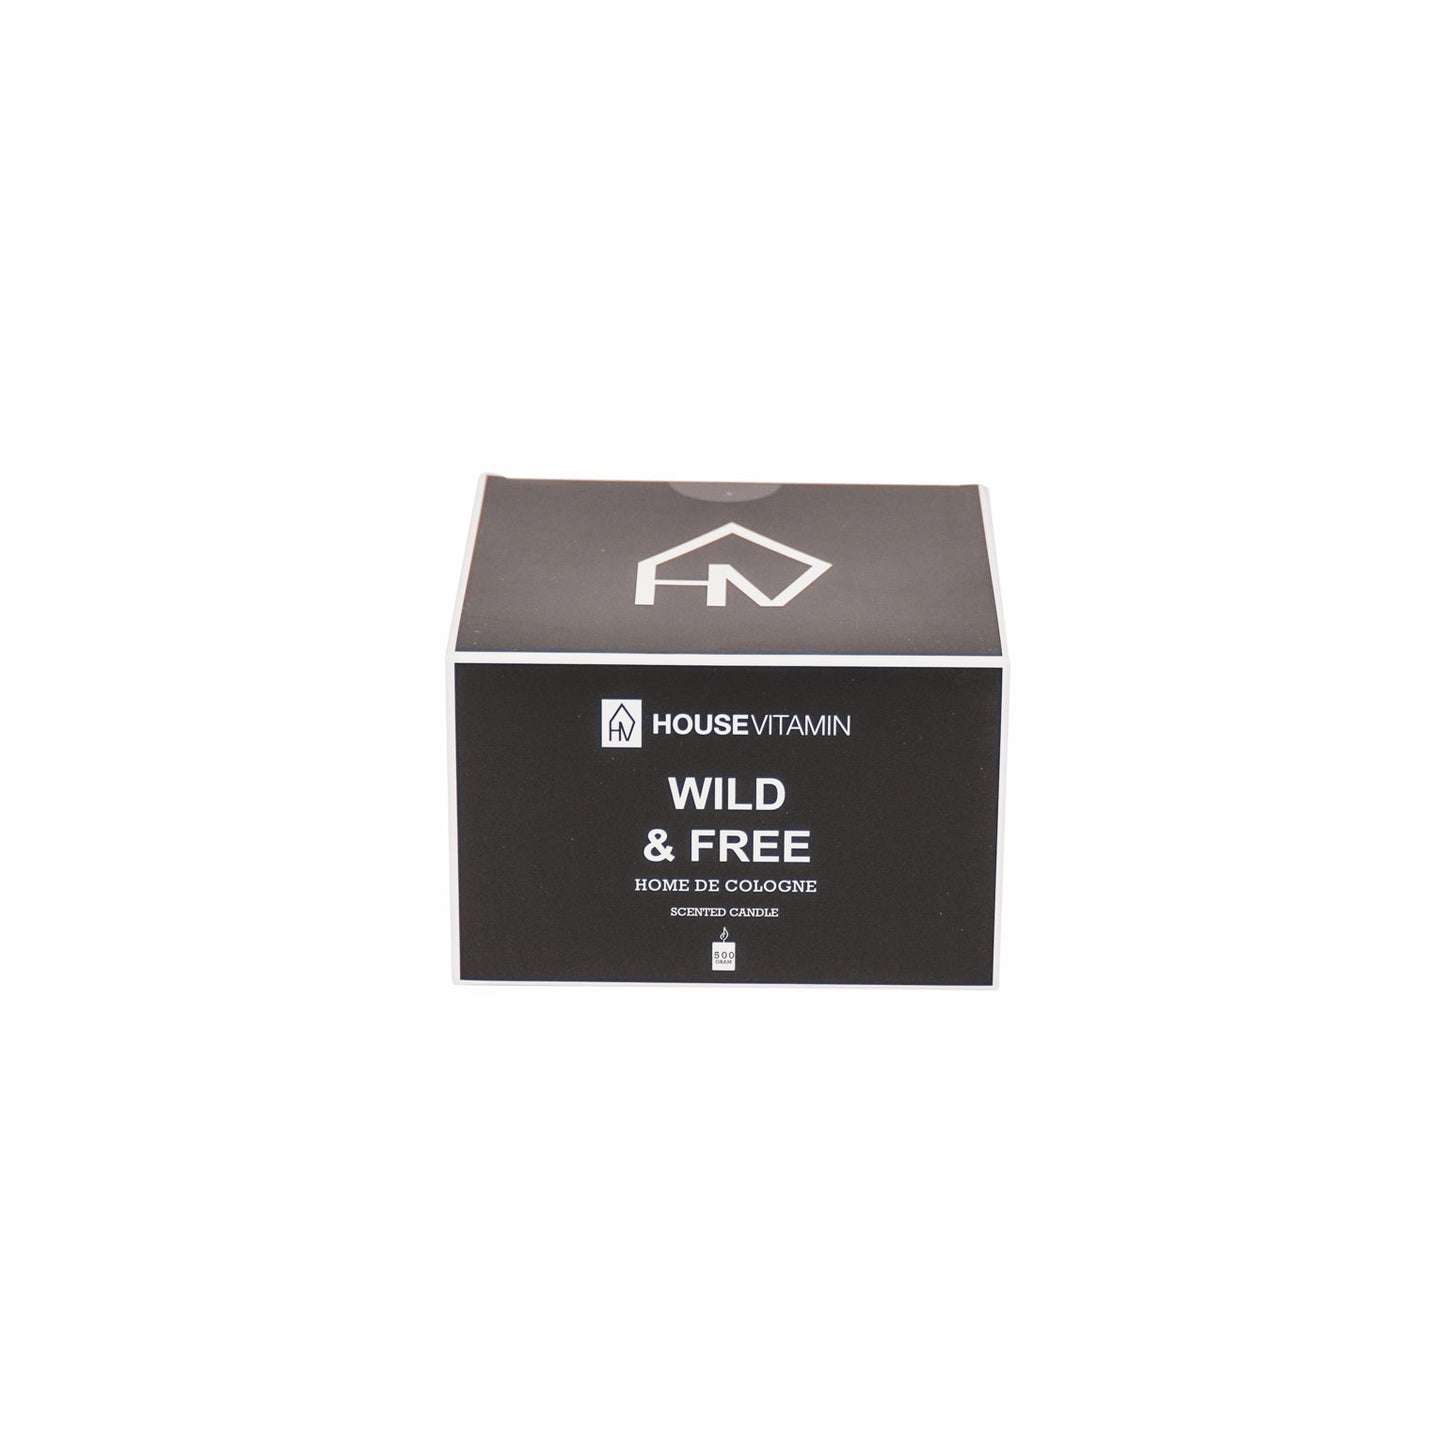 Housevitamin Home de Cologne Geurkaars - 500gr - Wild and free